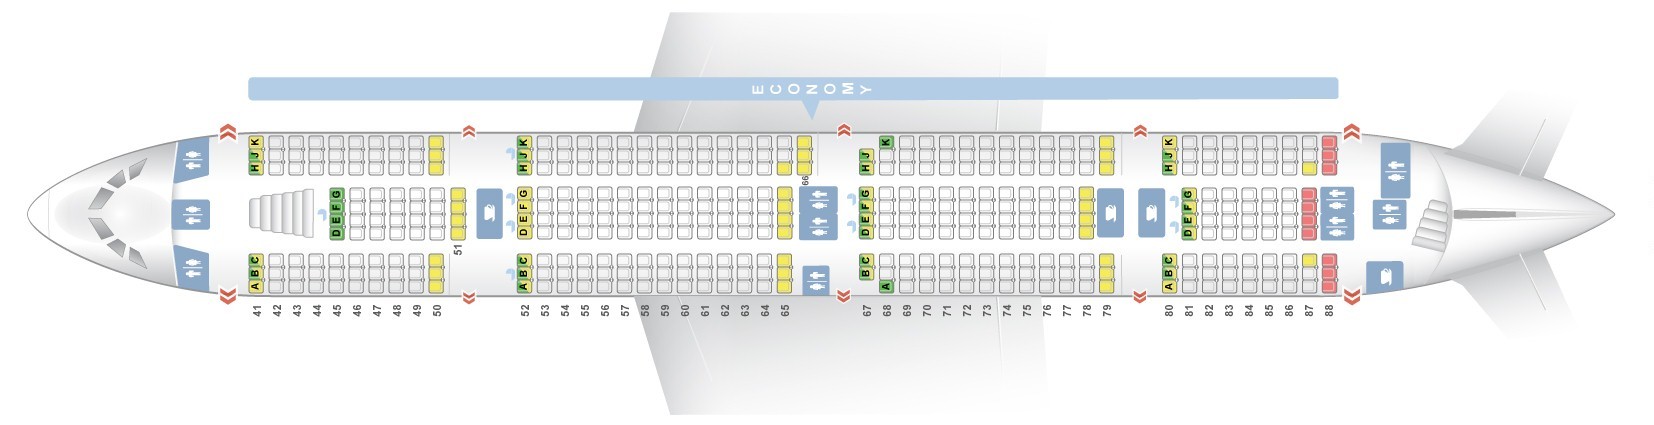 Airbus A380 Seating Chart